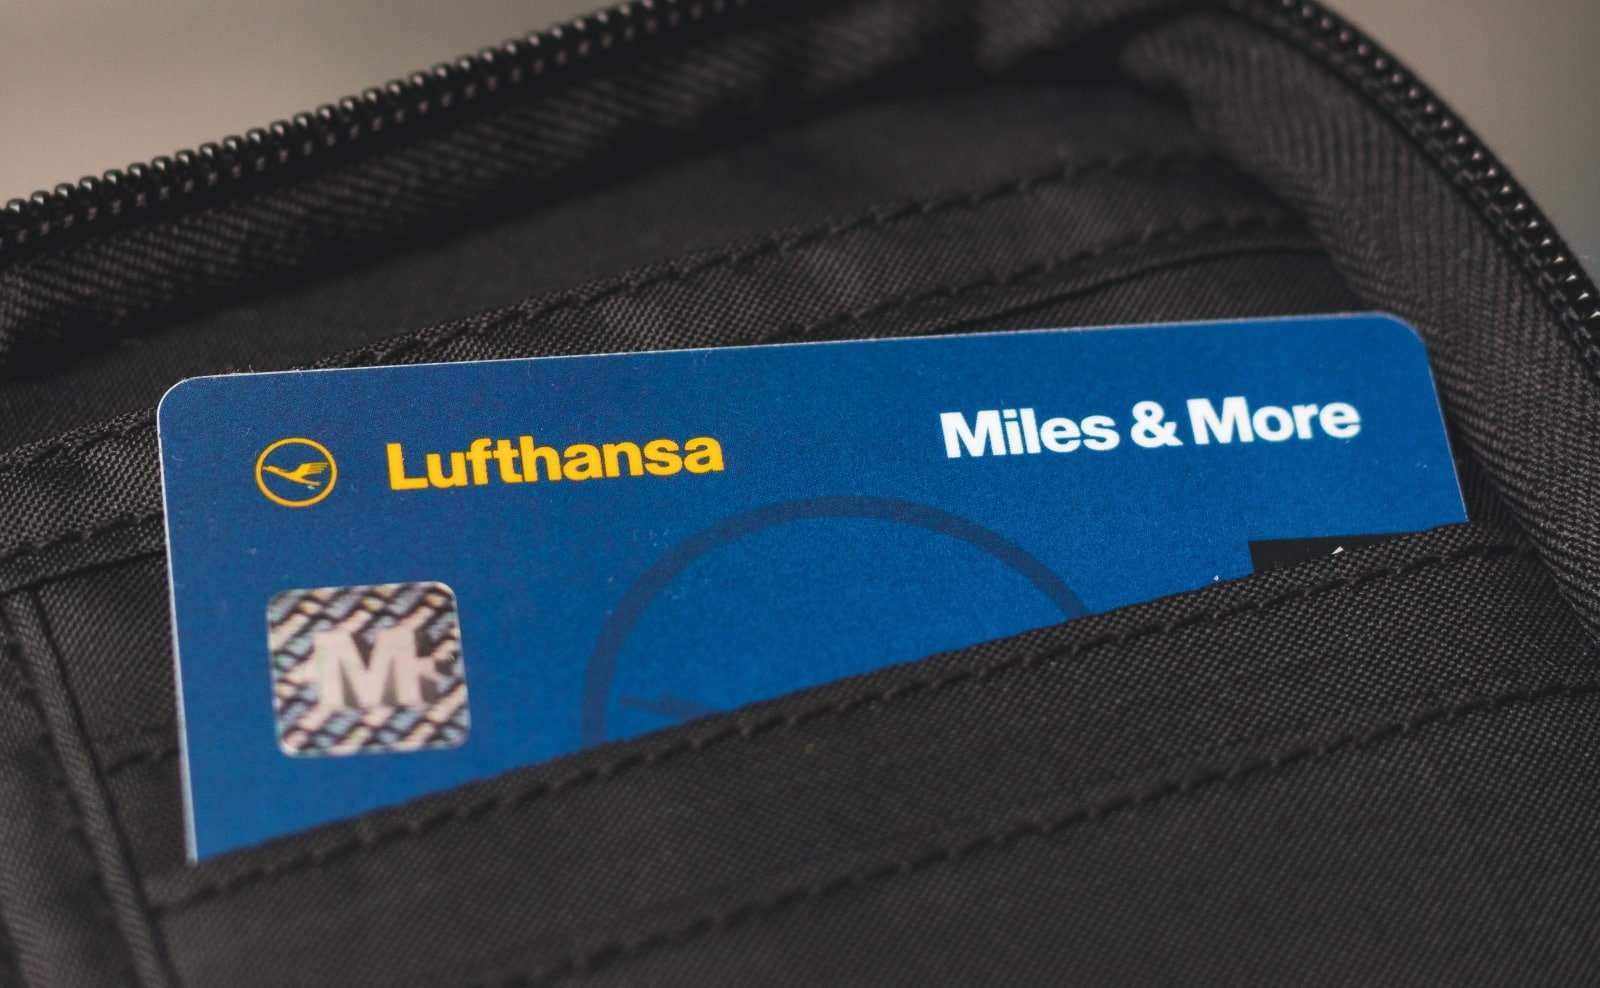 <p><span>Lufthansa’s Miles & More is Europe’s largest frequent flyer program, offering miles for flights with Lufthansa and partner airlines, which can be redeemed for flights, upgrades, and shopping. The program provides a range of ways to earn miles, including flights, hotel stays, car rentals, and everyday spending with credit card partners.</span></p> <p><span>Miles & More also features a variety of redemption options, giving members the flexibility to use their miles in a way that best suits their travel needs. Elite status in the program offers additional benefits like lounge access and extra baggage allowance, enhancing the travel experience for frequent flyers. </span></p> <p><b>Insider’s Tip: </b><span>Look out for Miles & More credit card offers to earn additional miles.</span></p>